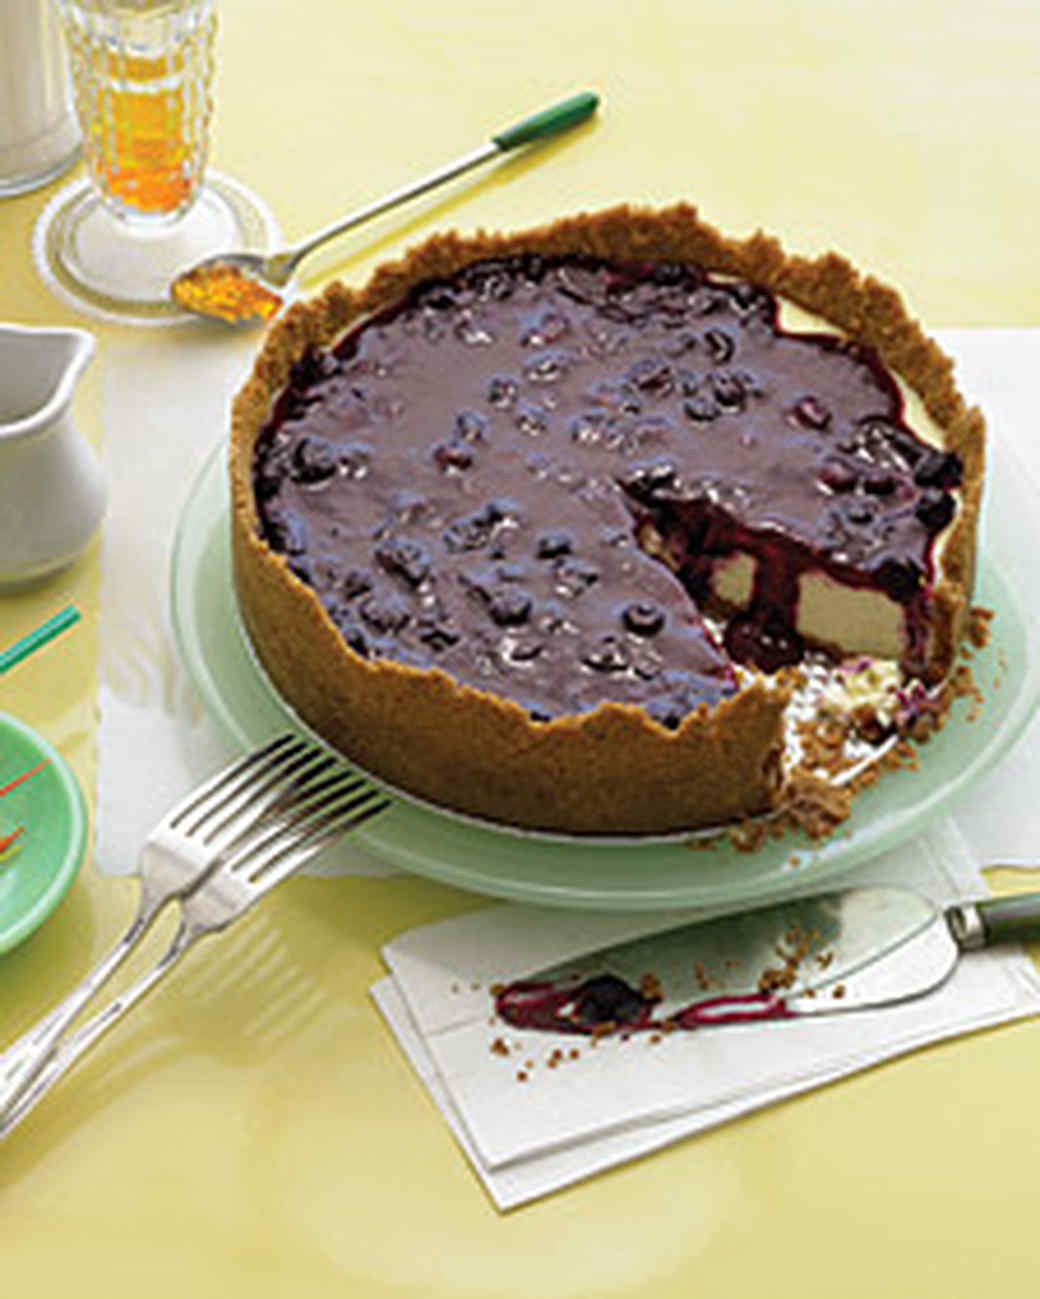 Blueberry Topping For Cheesecake Recipe
 Cheesecake with Blueberry Topping Recipe